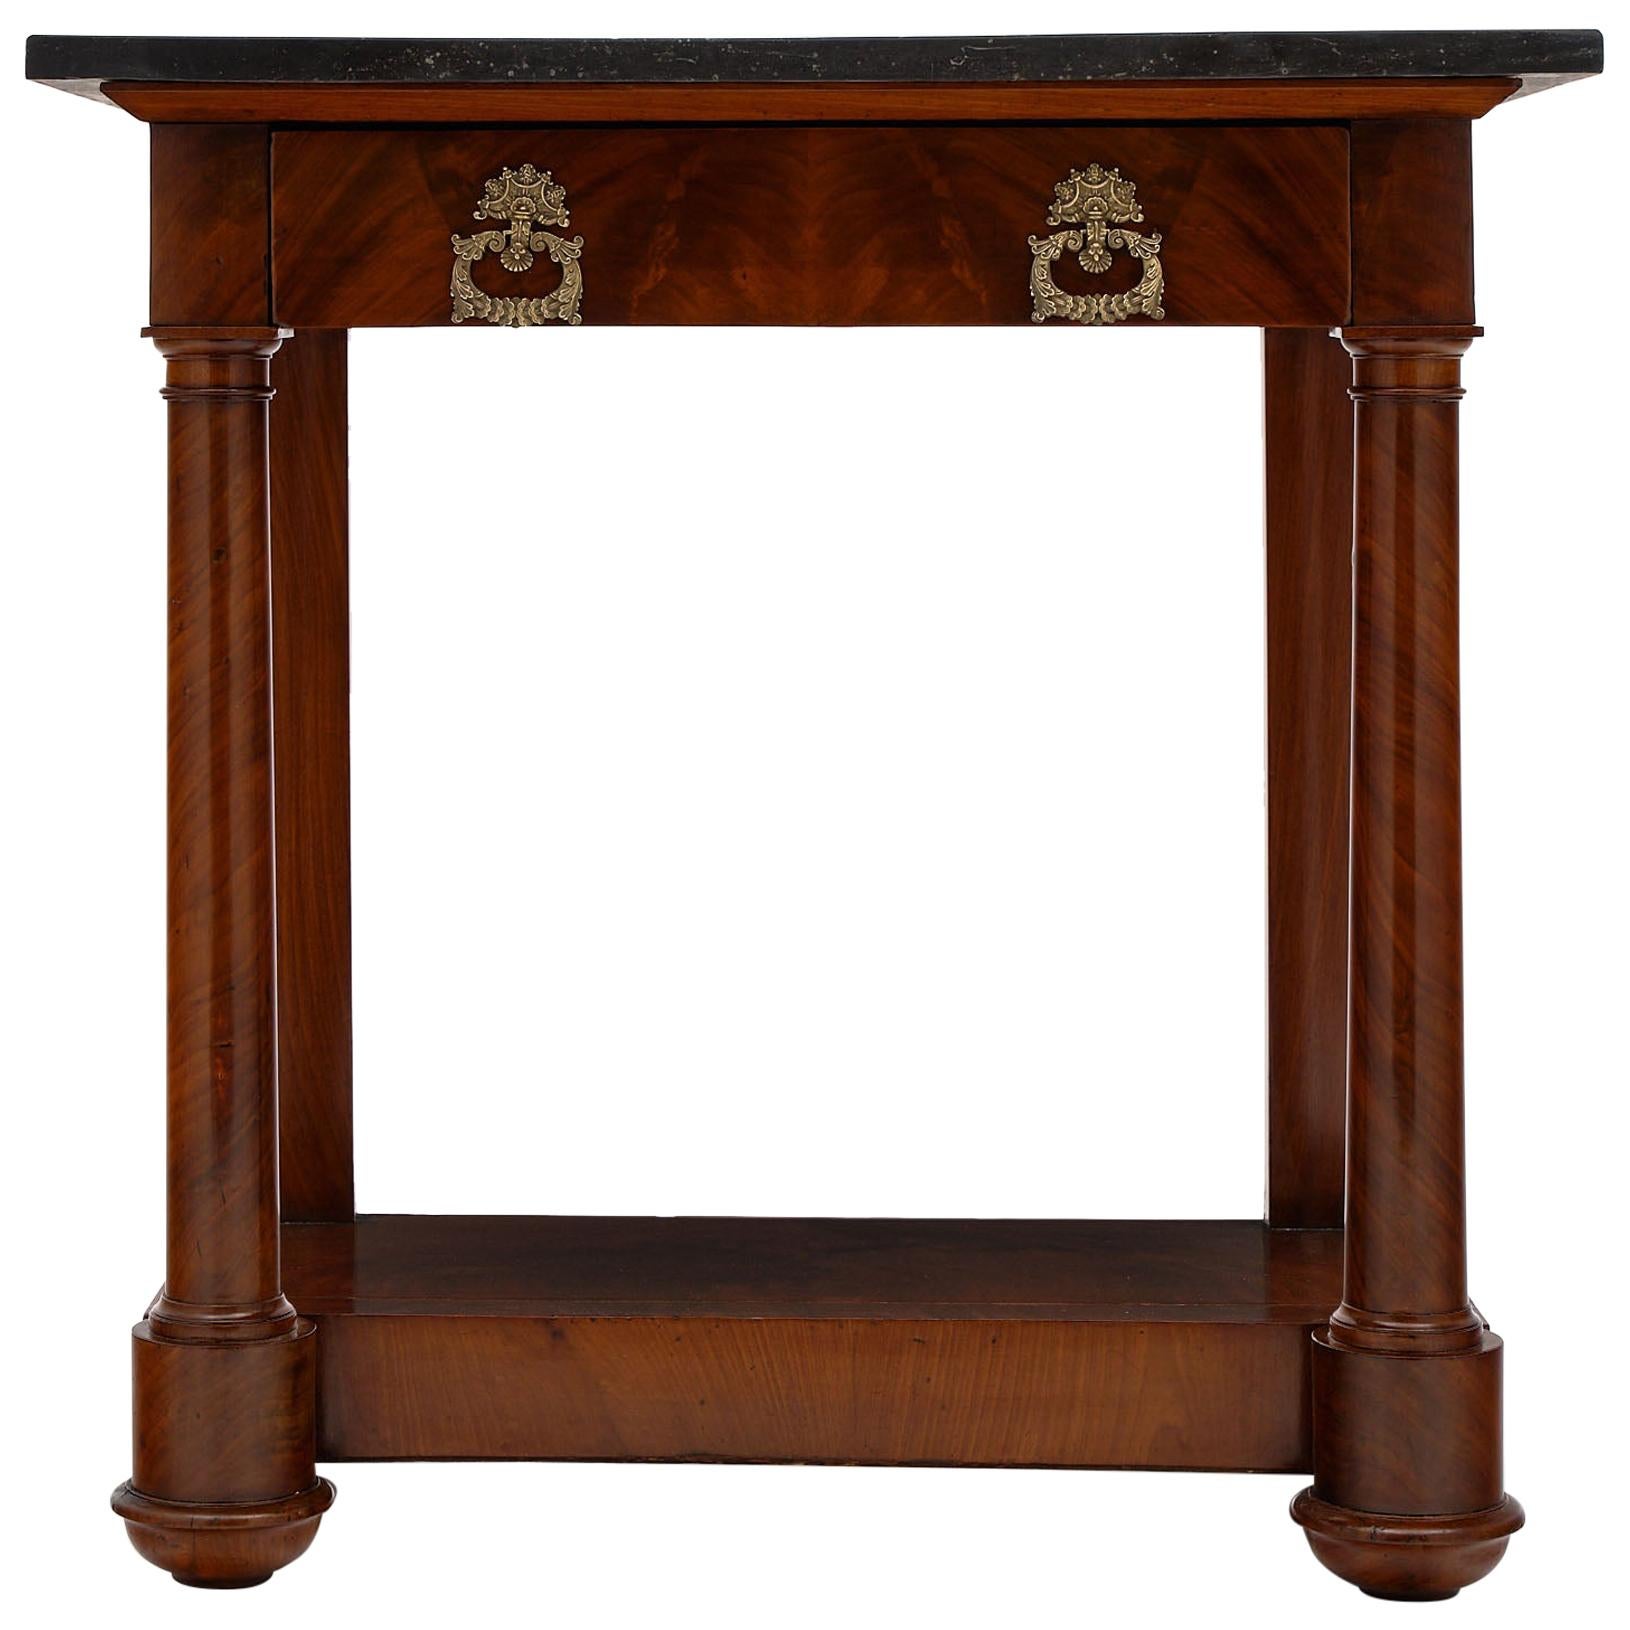 Empire Period Antique Console Table with Marble Top